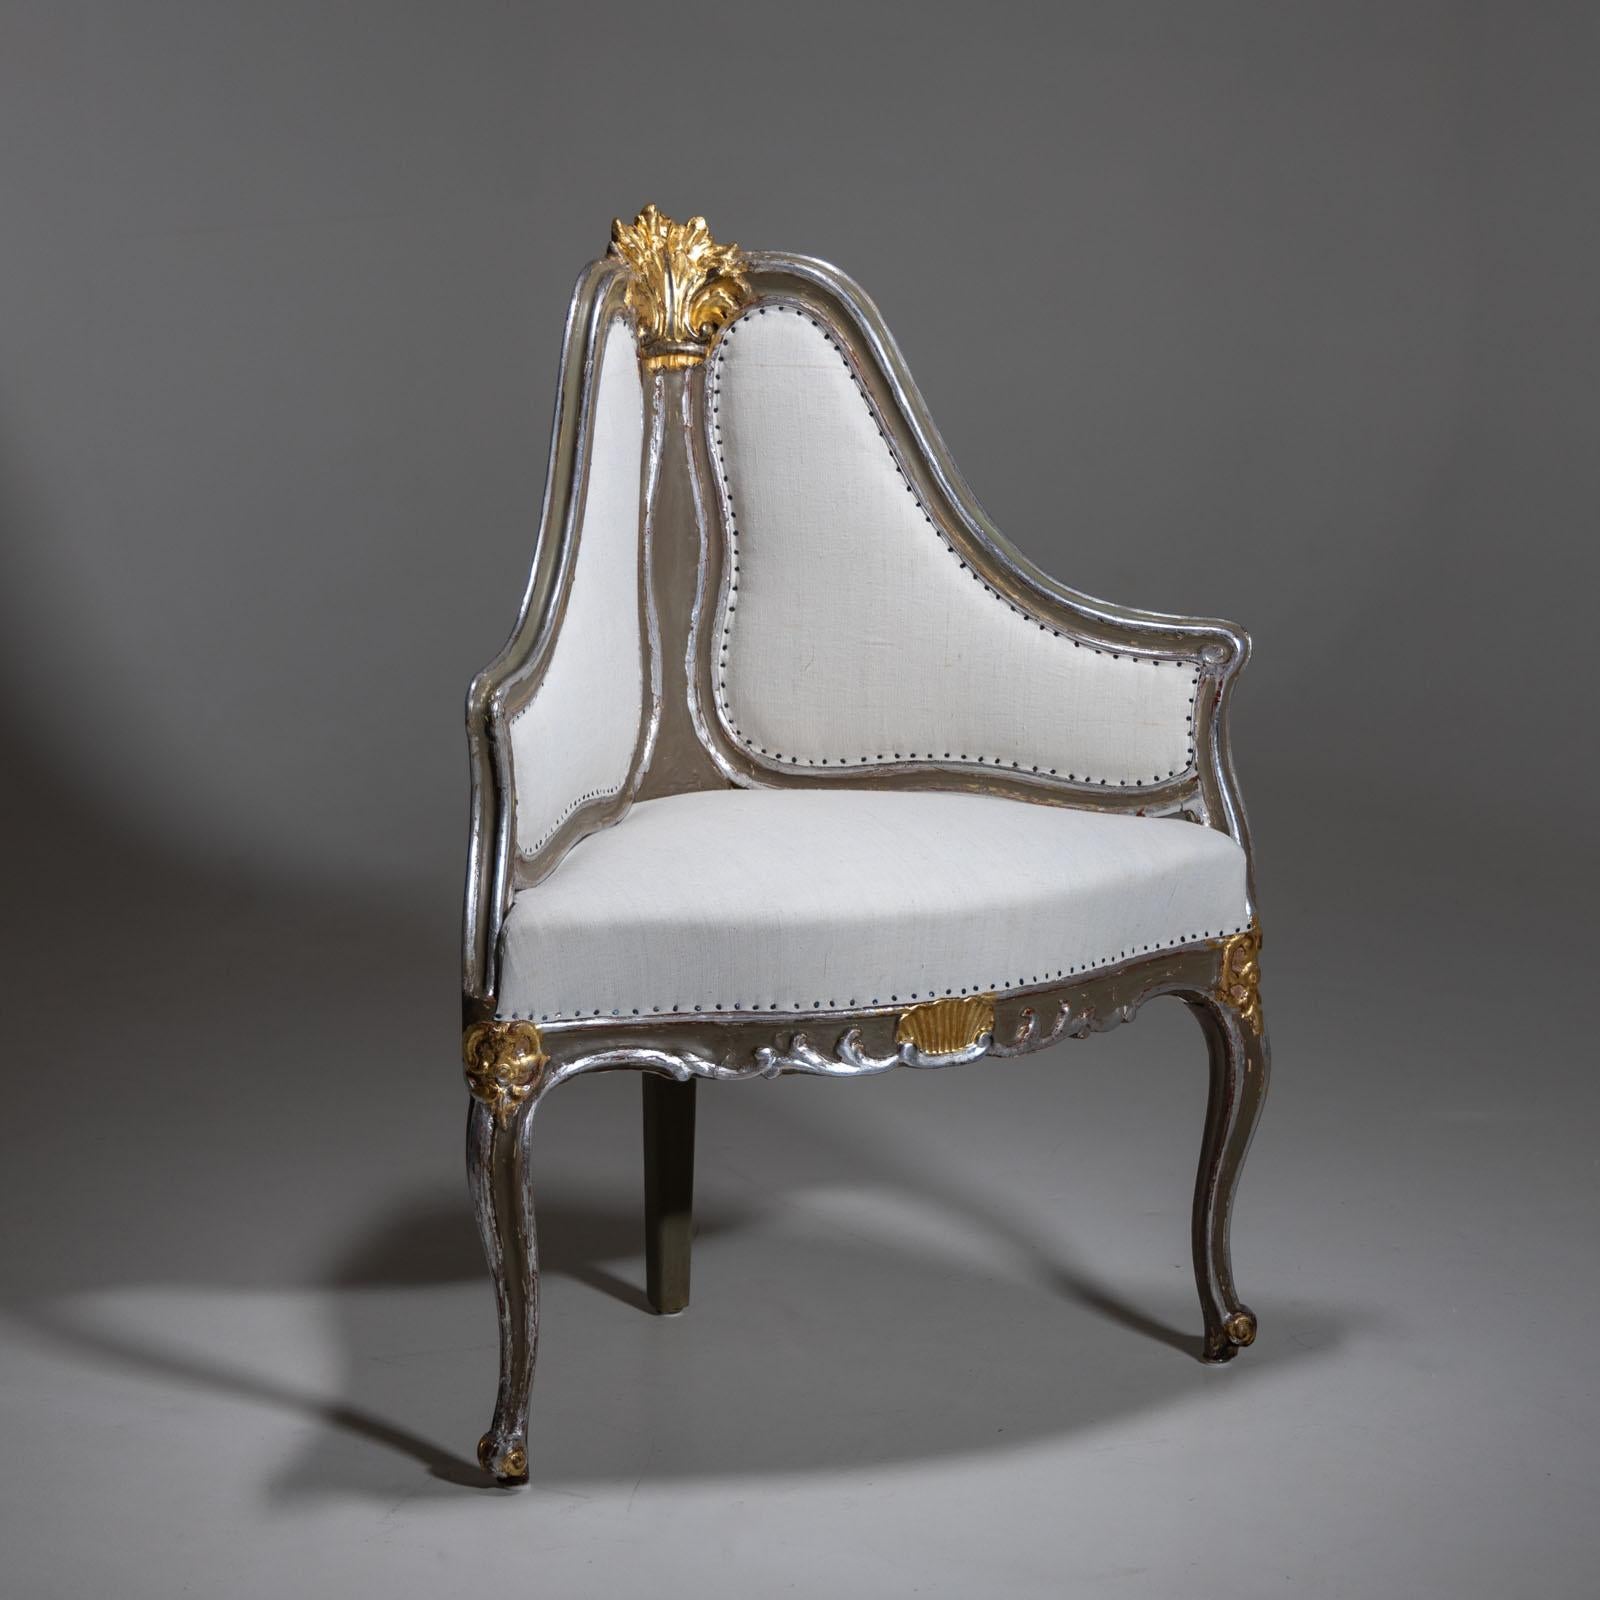 An armchair designed as a corner solution on three S-shaped legs with a wavy frame and shell decoration. The high curved backrest is upholstered and is crowned by another carved leaf ornament. The armchair is newly painted and patinated in gold and